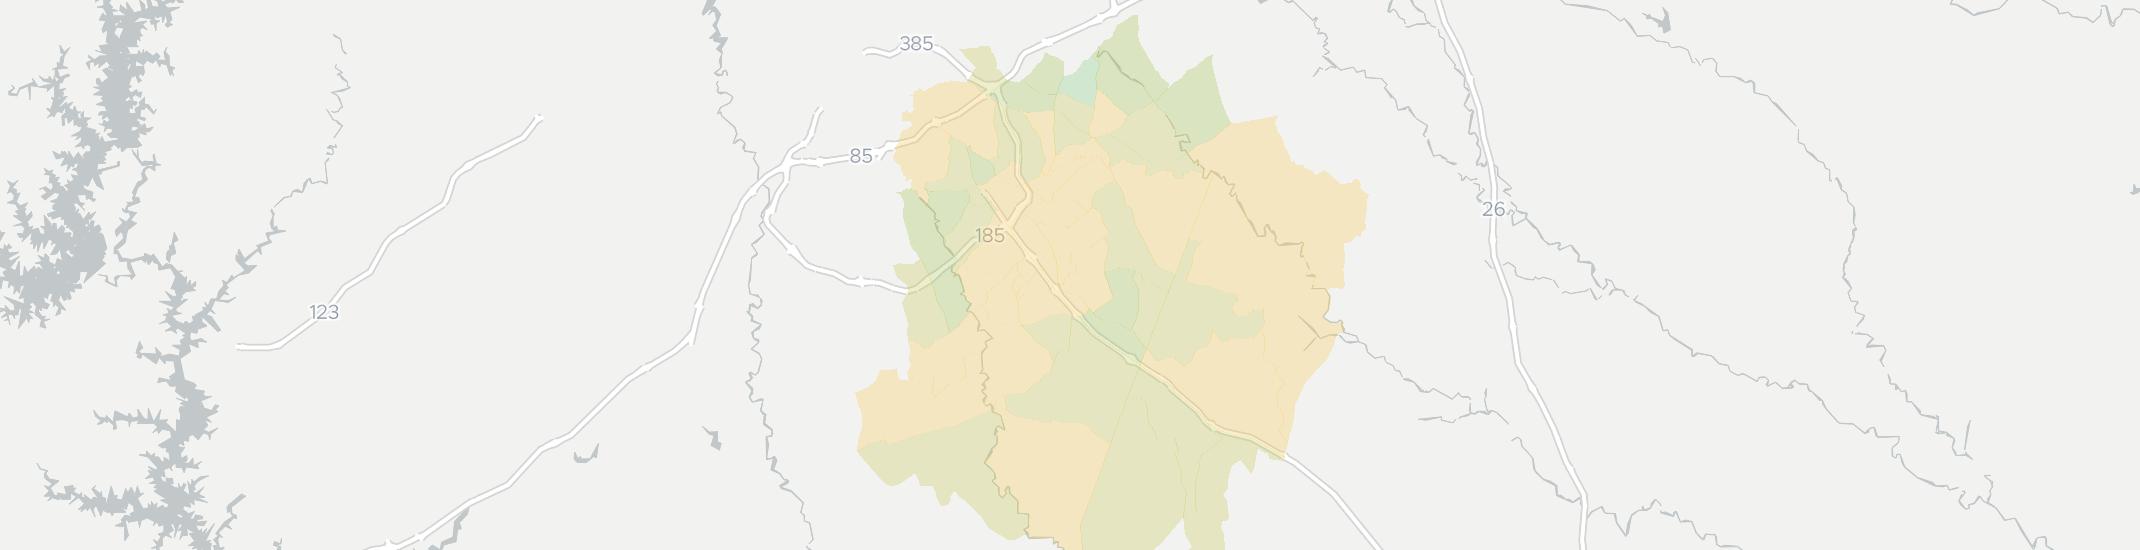 Simpsonville Internet Competition Map. Click for interactive map.